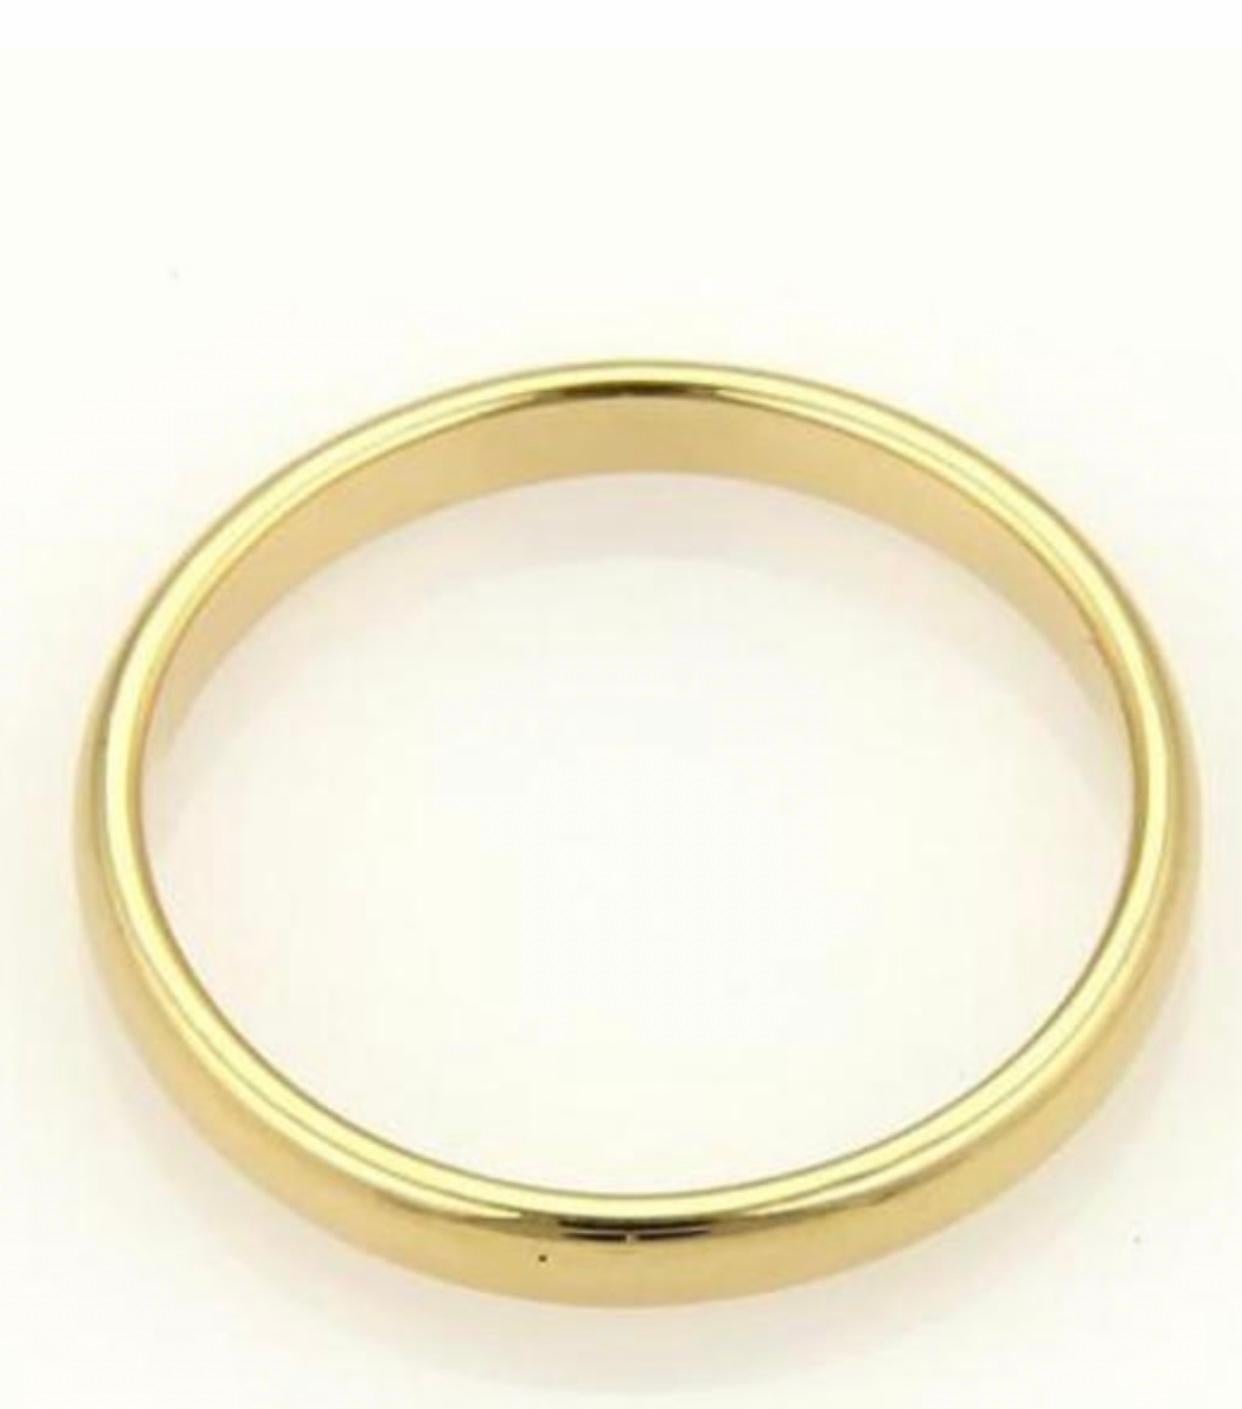 Tiffany & Co. Yellow Gold Plain Wedding Band Ring, Estate In Excellent Condition For Sale In New York, NY